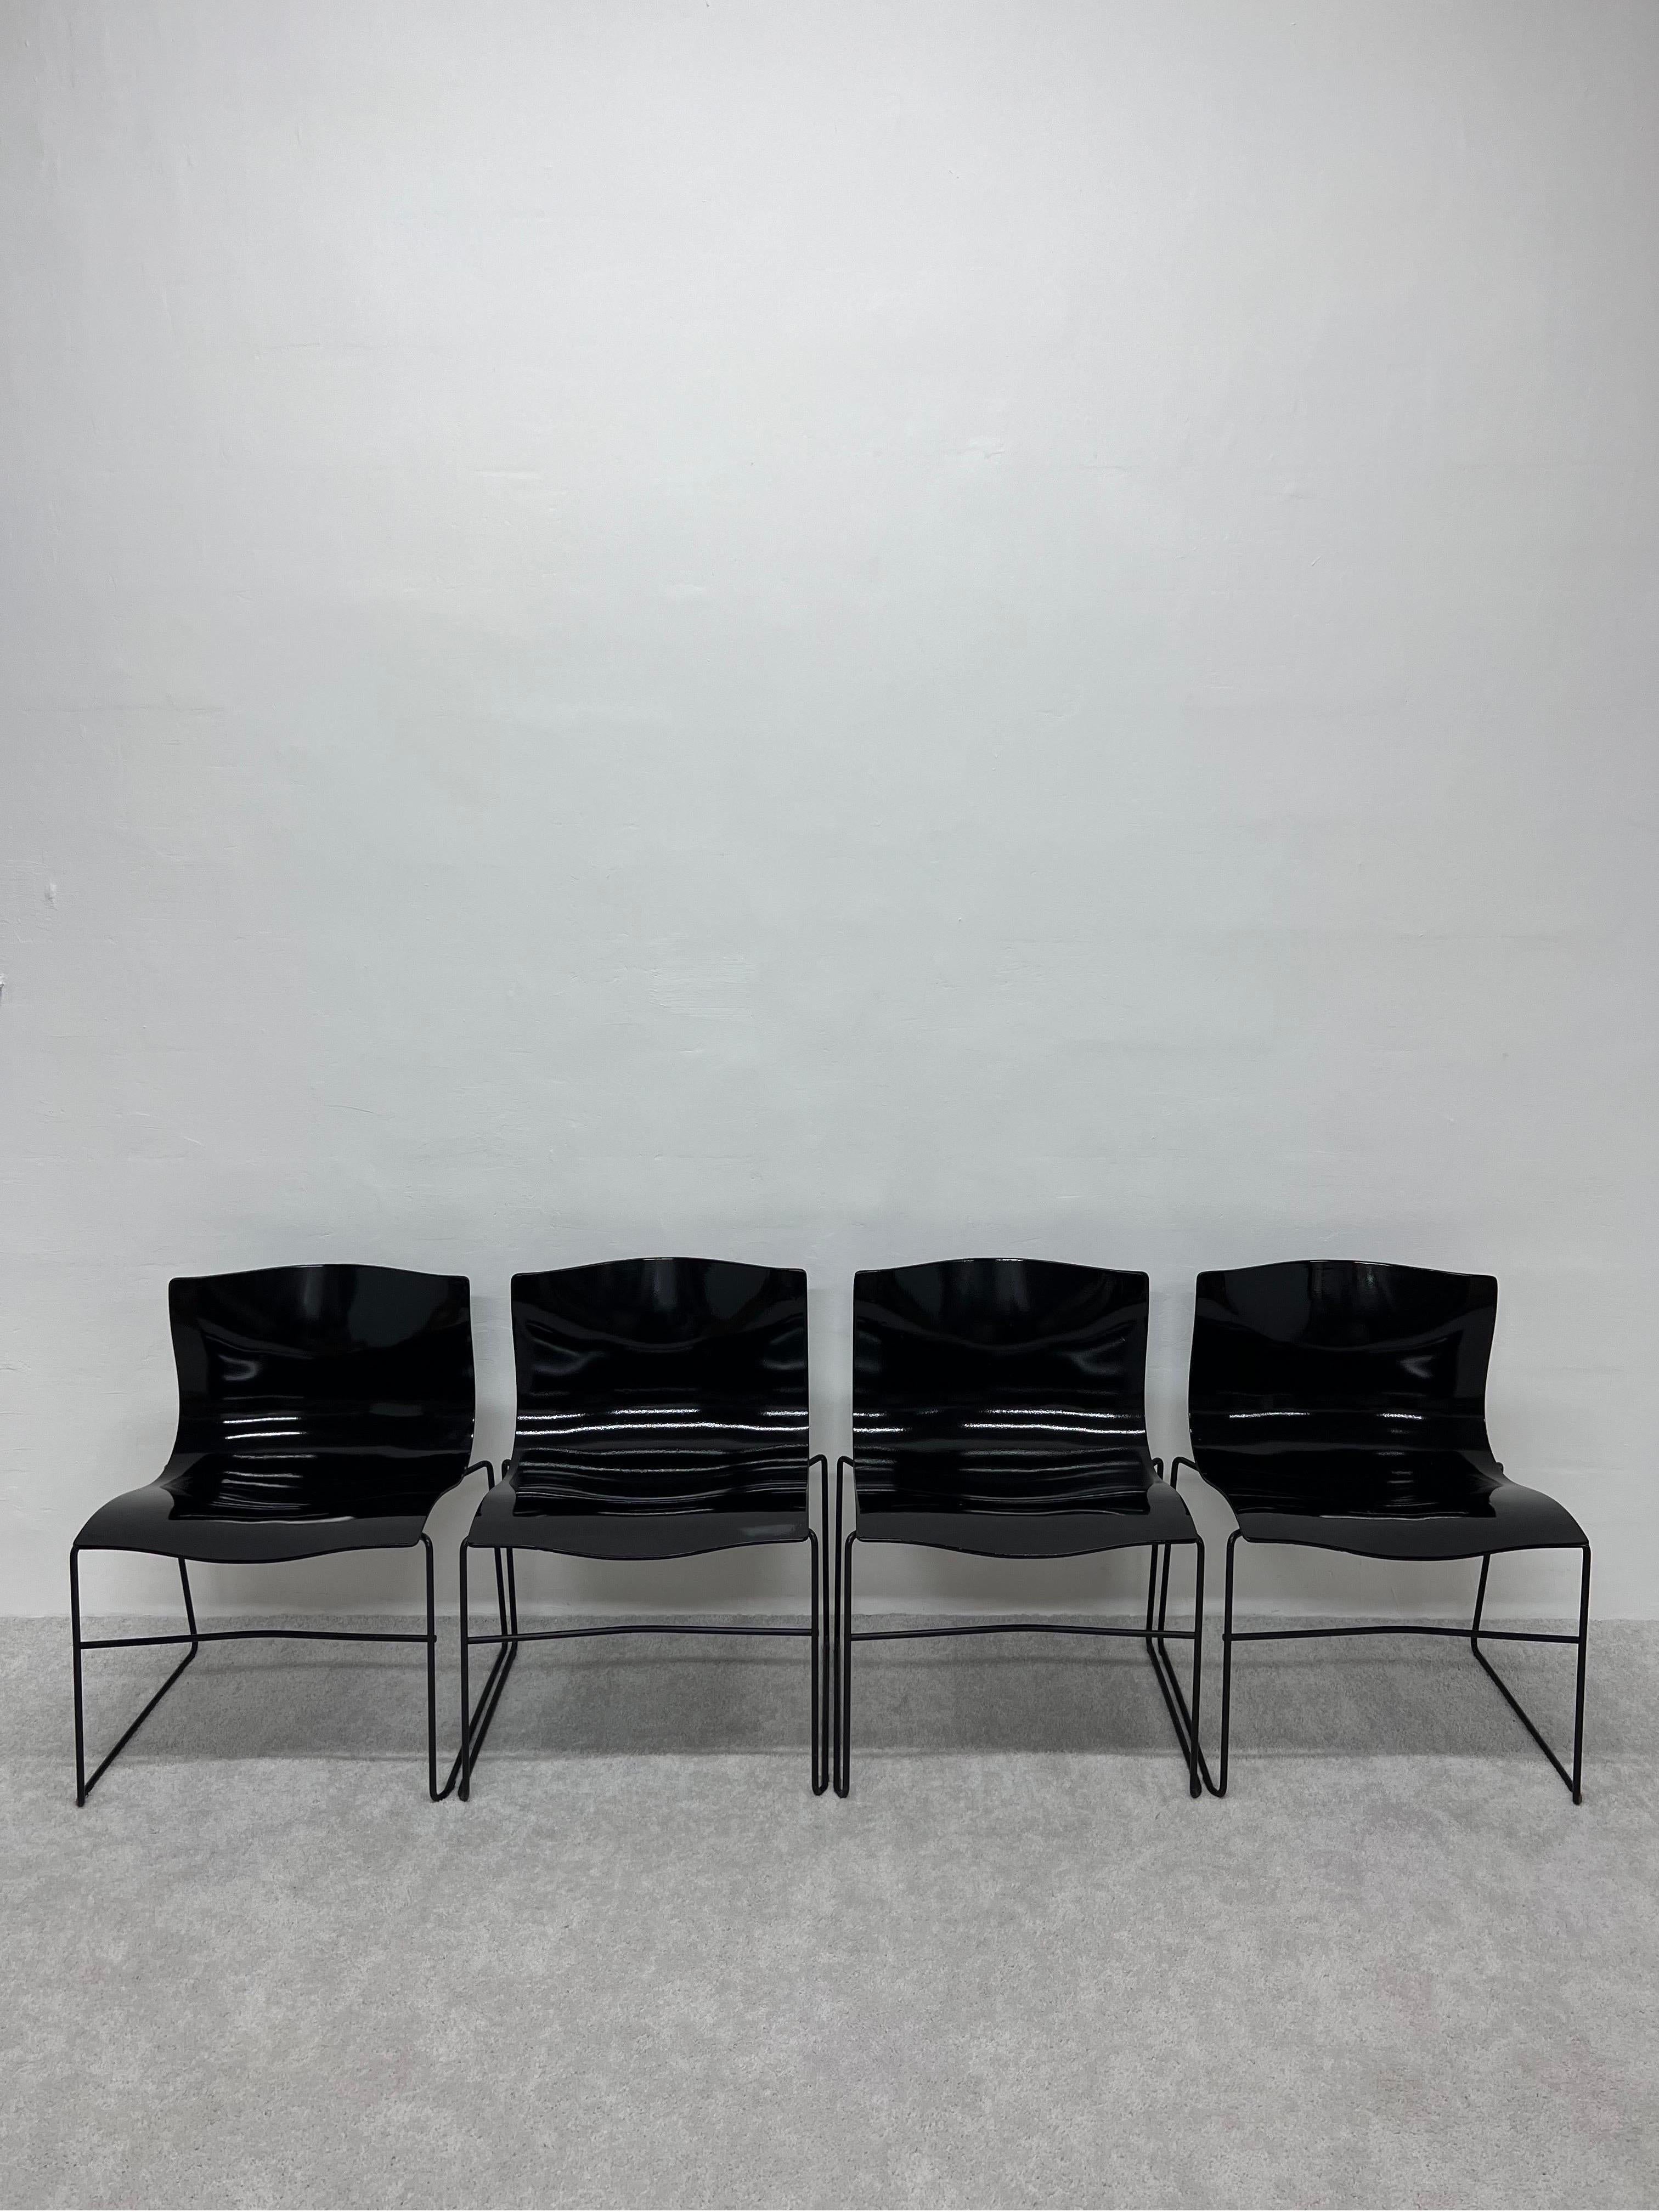 Black high-gloss lacquered Handkerchief chairs on black lacquered frames by Lella and Massimo Vignelli for Knoll.

In 1968 Vignelli was contracted by Knoll to re-envision the corporate identity and graphics program, resulting in the Knoll logo in